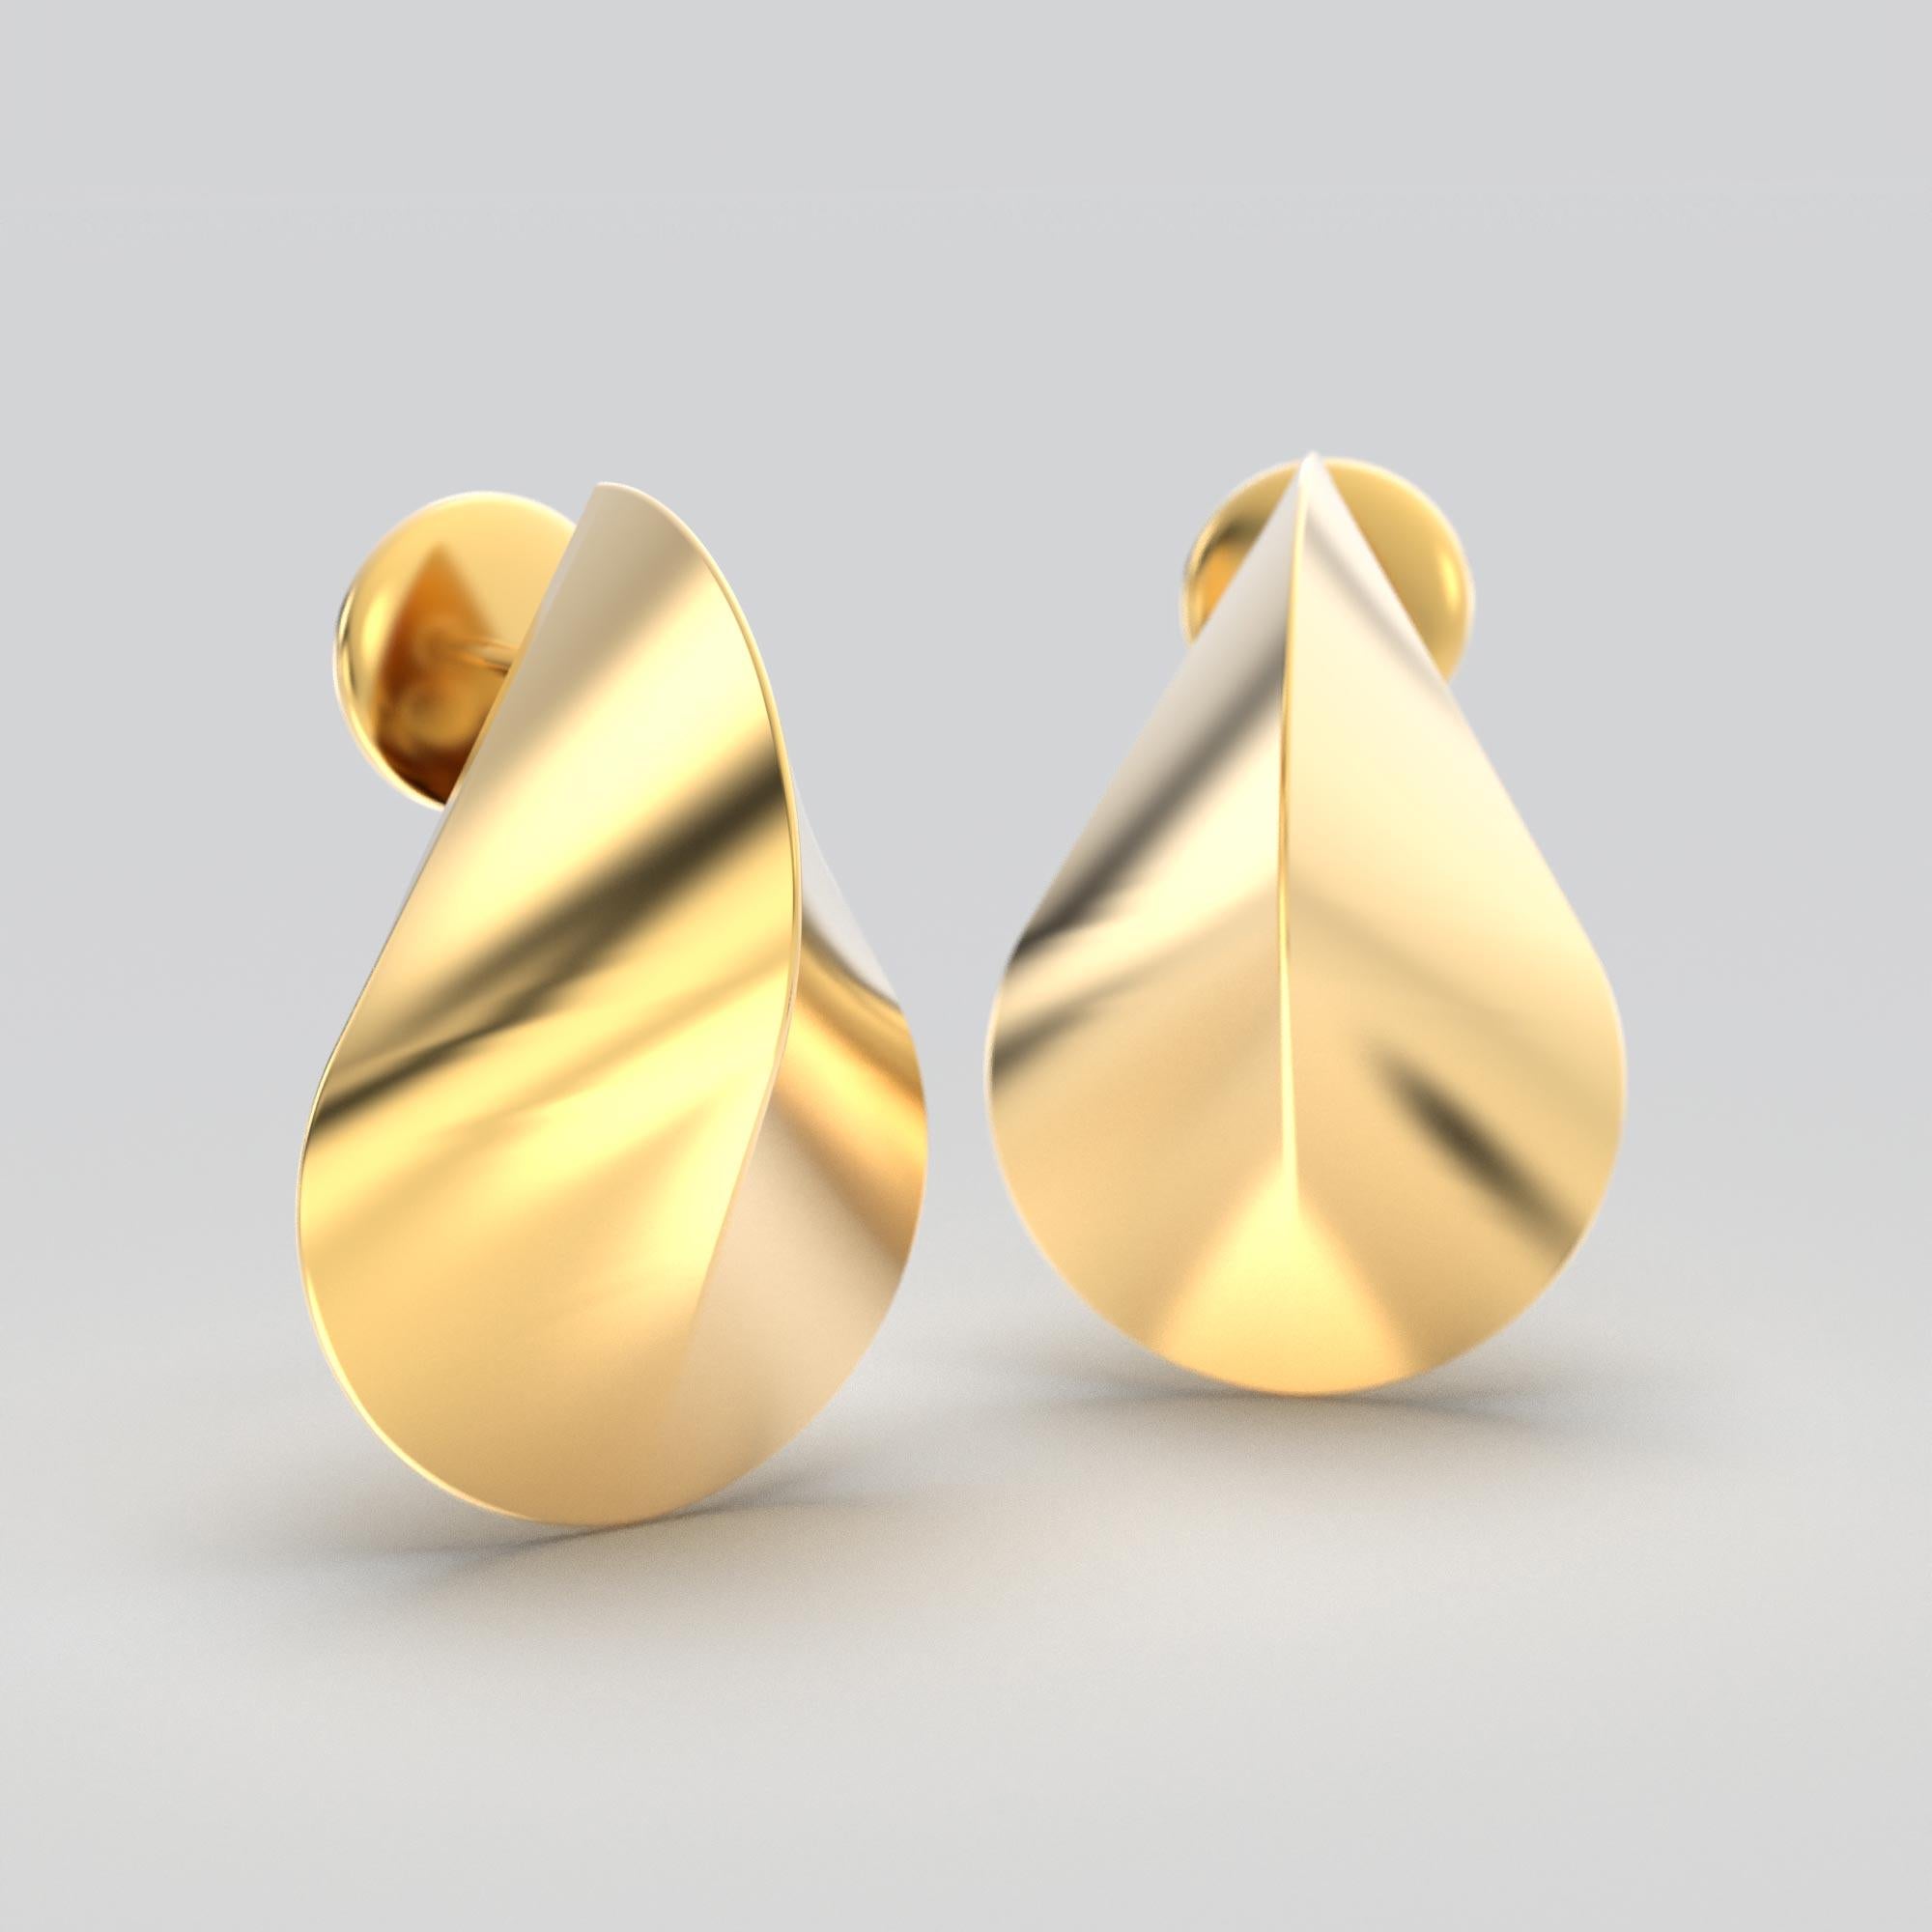 Made to order Oloid-shaped gold earrings, expertly made in Italy by Oltremare Gioielli. Available in  18k gold, each pair exudes sophistication and elegance. With a sleek, polished finish and a modern silhouette measuring 28mm in length and 19mm in